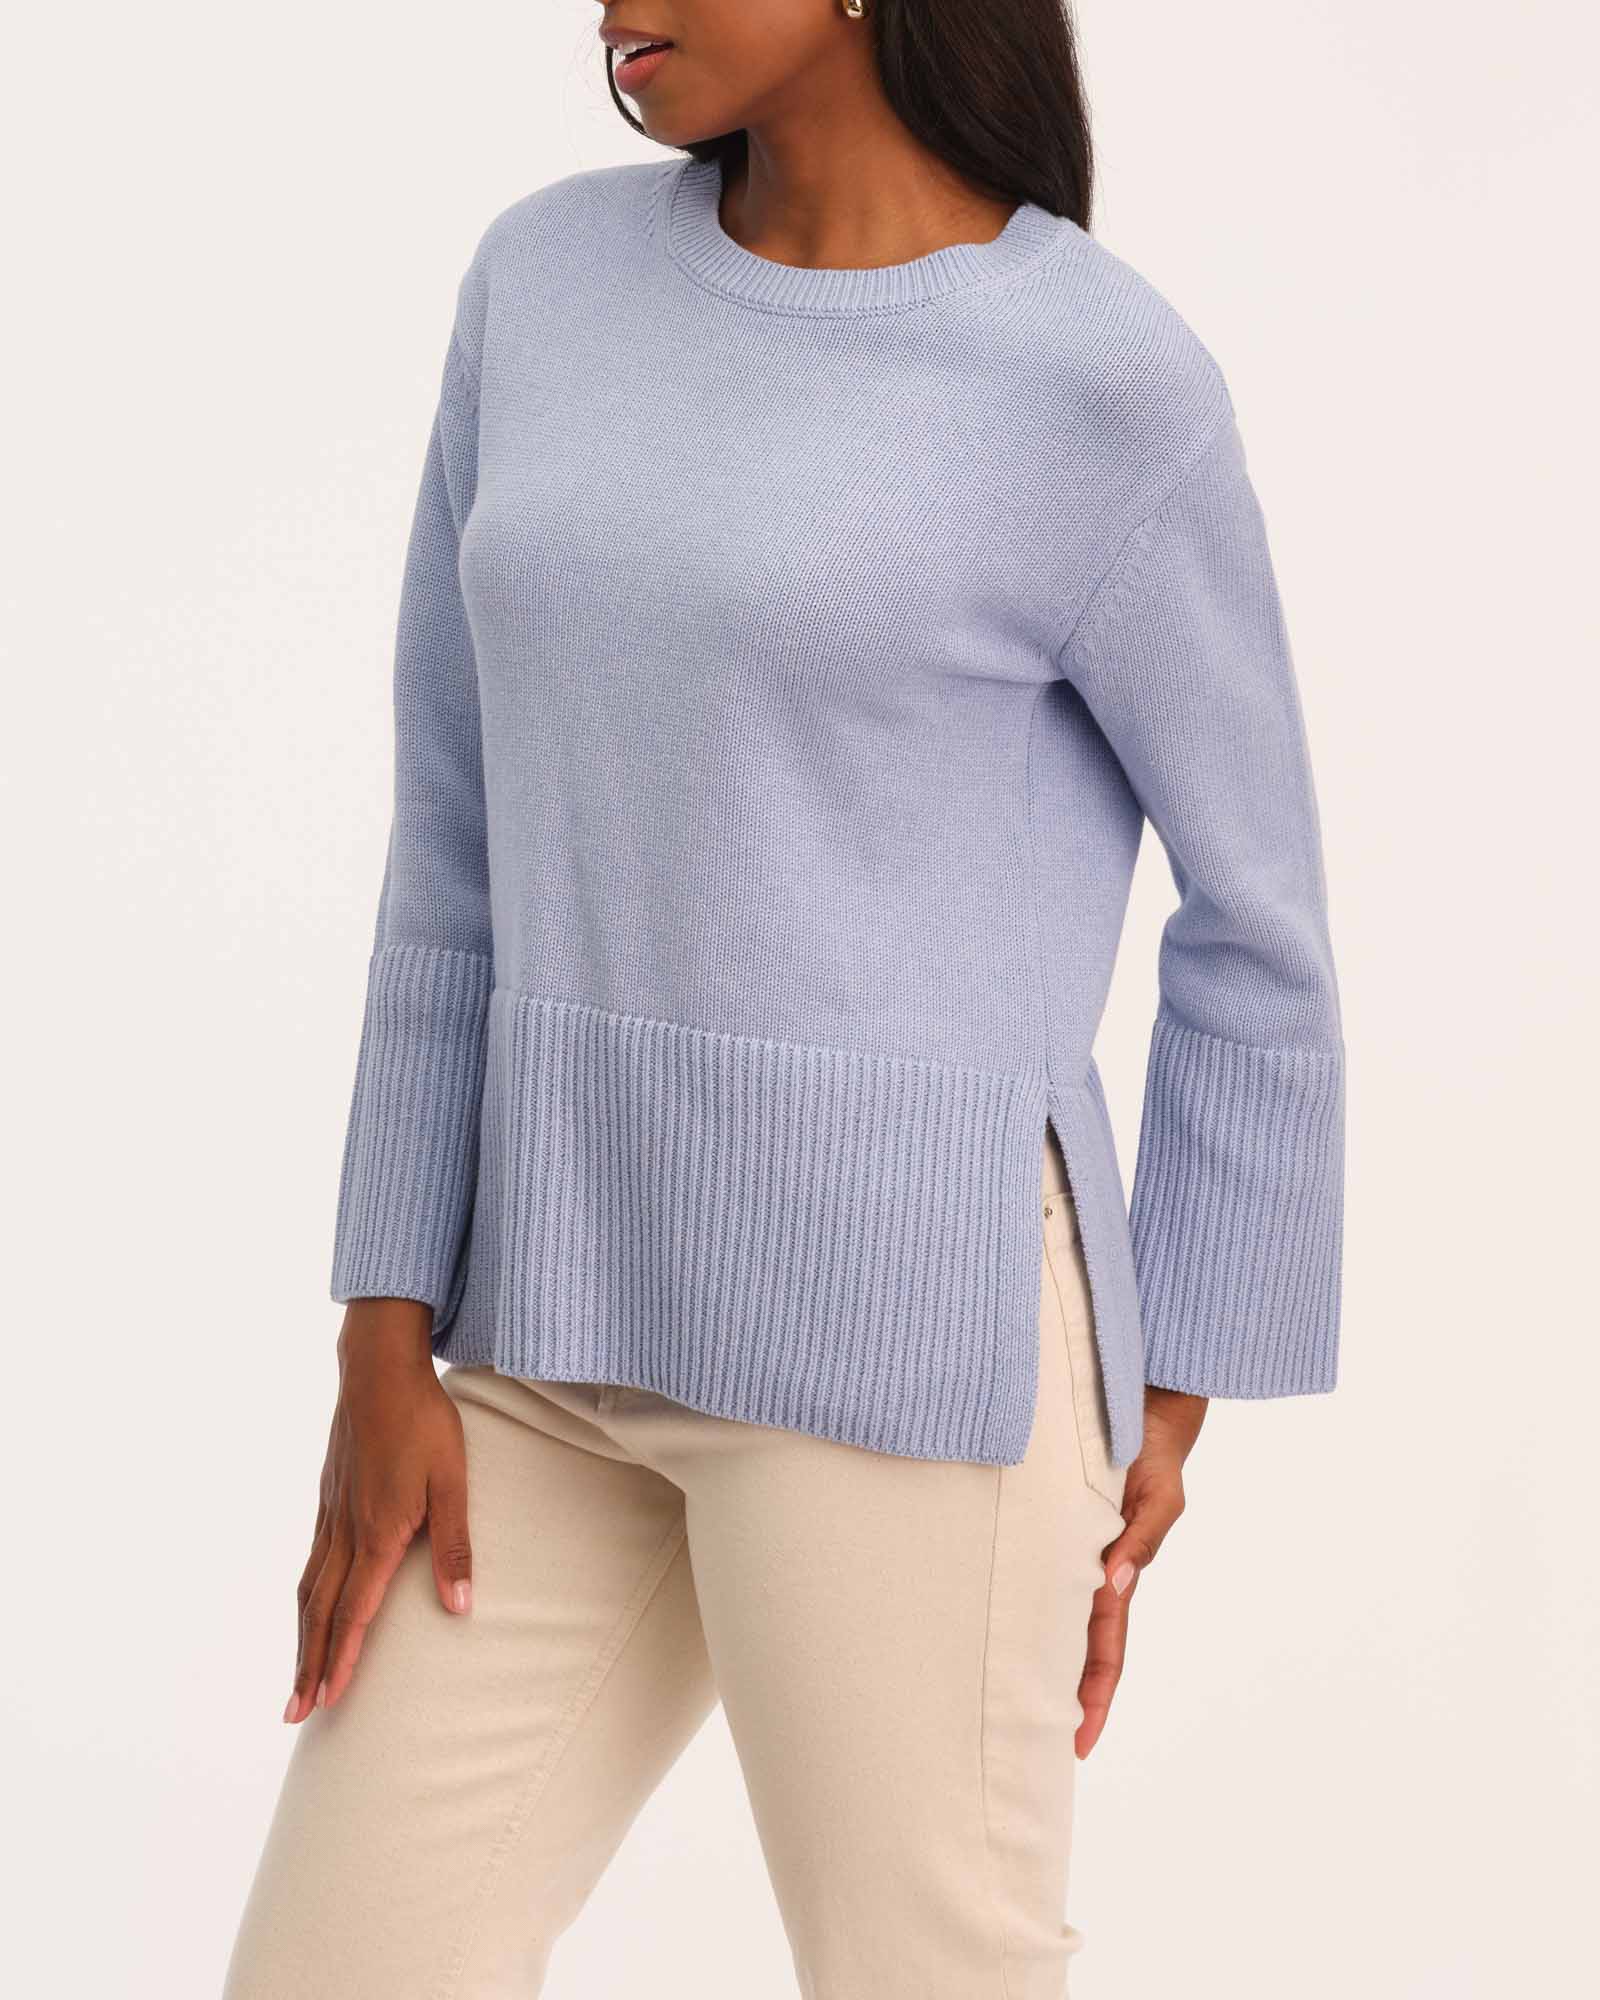 Shop For The Republic Women's Classic Crewneck Sweater with Side Vents | JANE + MERCER